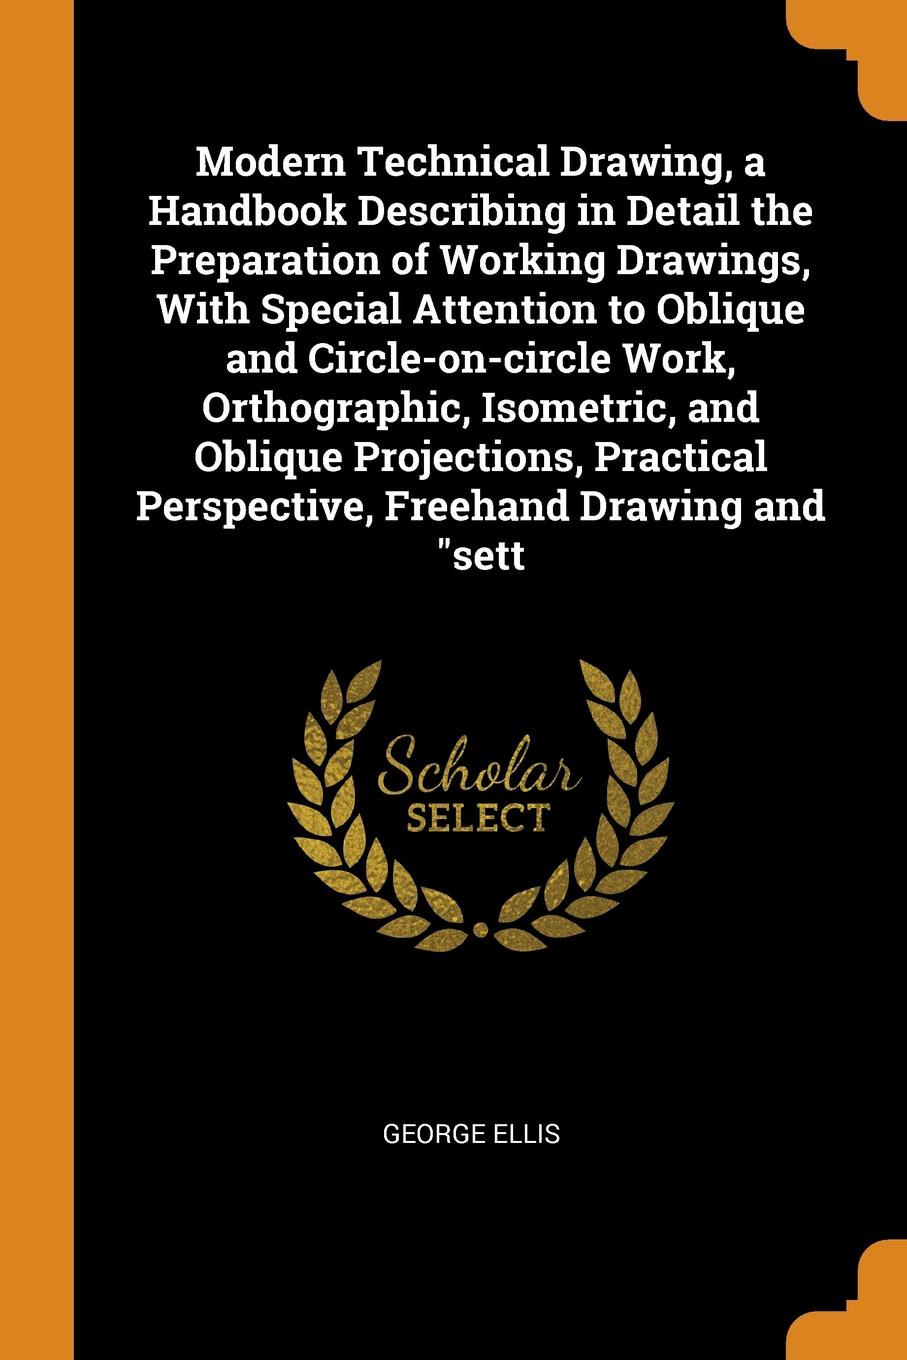 Modern Technical Drawing, a Handbook Describing in Detail the Preparation of Working Drawings, With Special Attention to Oblique and Circle-on-circle Work, Orthographic, Isometric, and Oblique Projections, Practical Perspective, Freehand Drawing a...